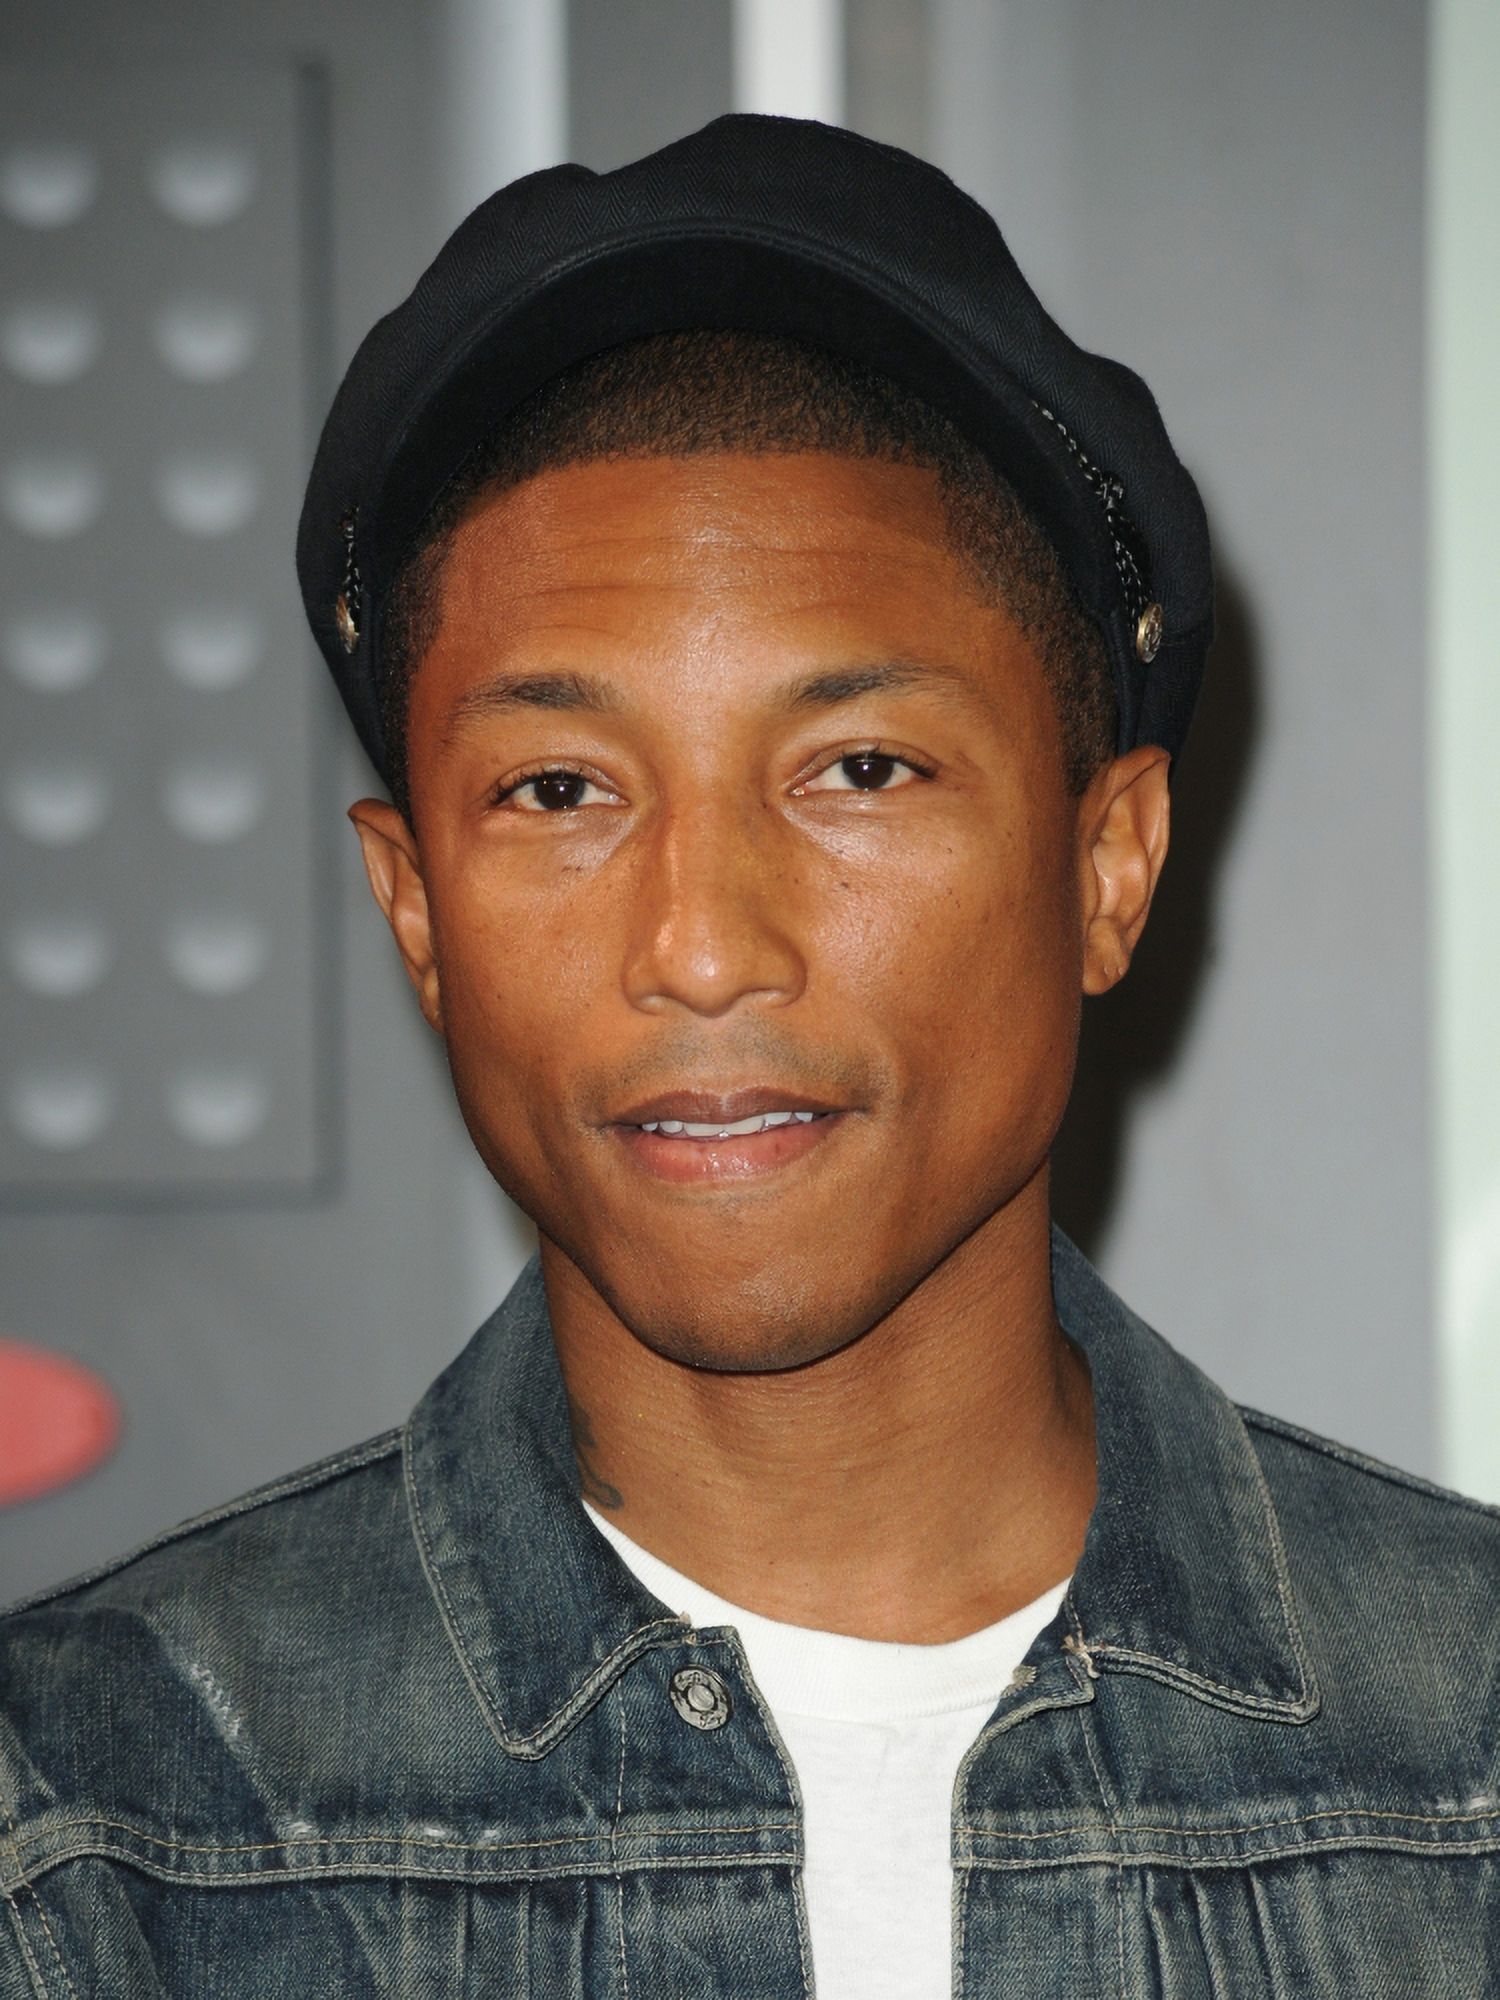 Pharrell Williams At Arrivals For Mtv Video Music Awards (Vma) 2015 - Arrivals 2 Photo Print (8 x 10) - image 1 of 1